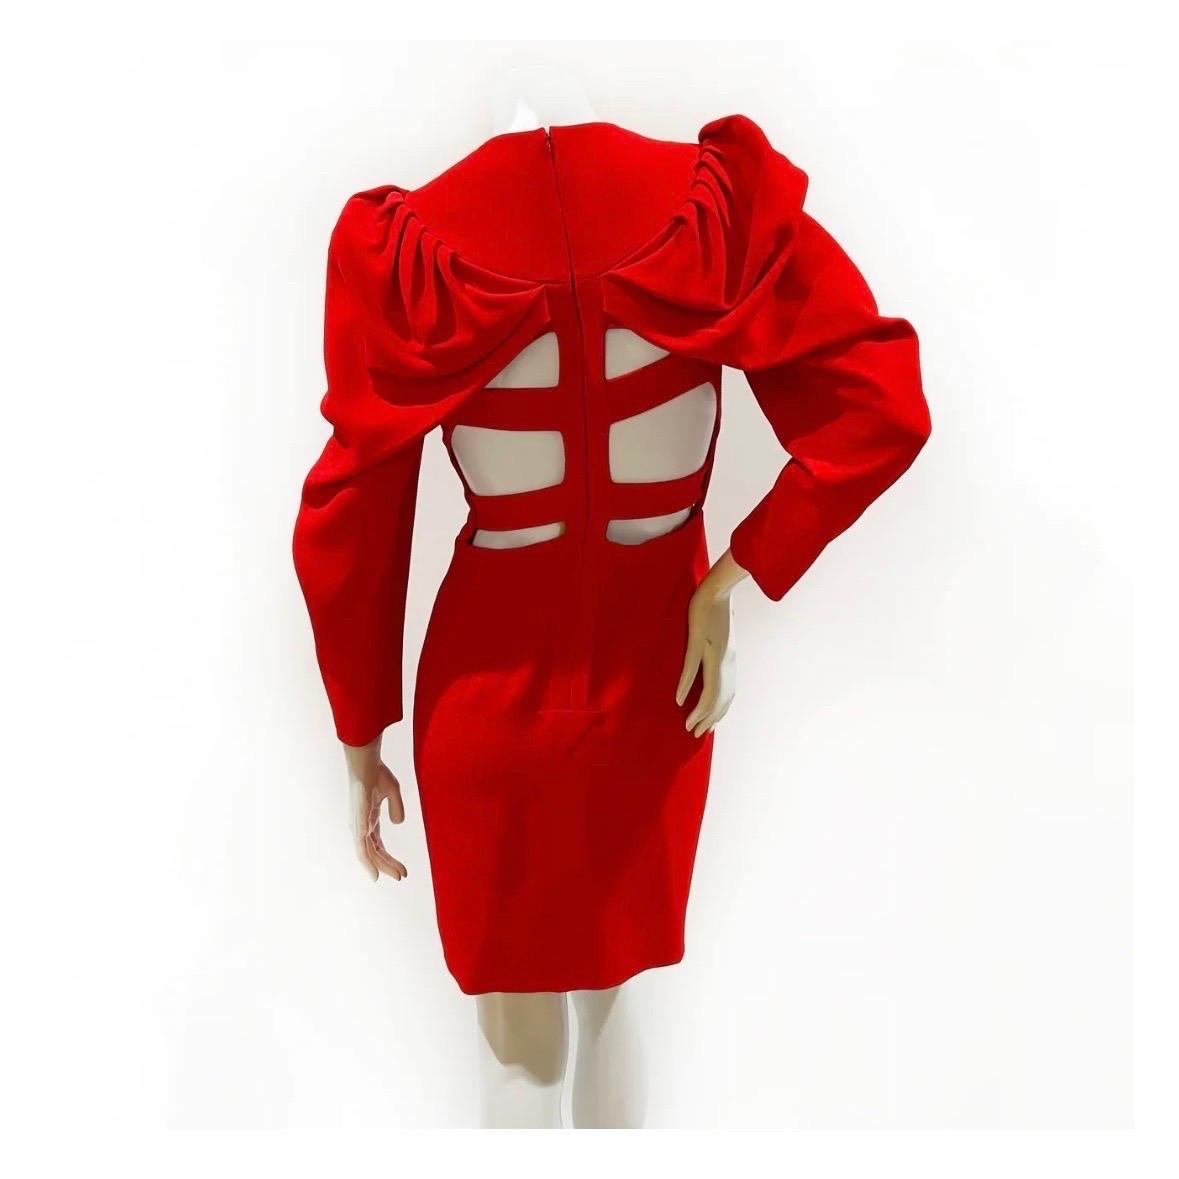 Bandage cutout dress by Givenchy
Made in Italy
Red
Three-quarter sleeves
Gathered shoulder detail
Shoulder pads  
Cutouts throughout bodice and back
Decorative overlapping bandage pieces  
Two functional pockets on bust 
Knee-length 
Back zipper